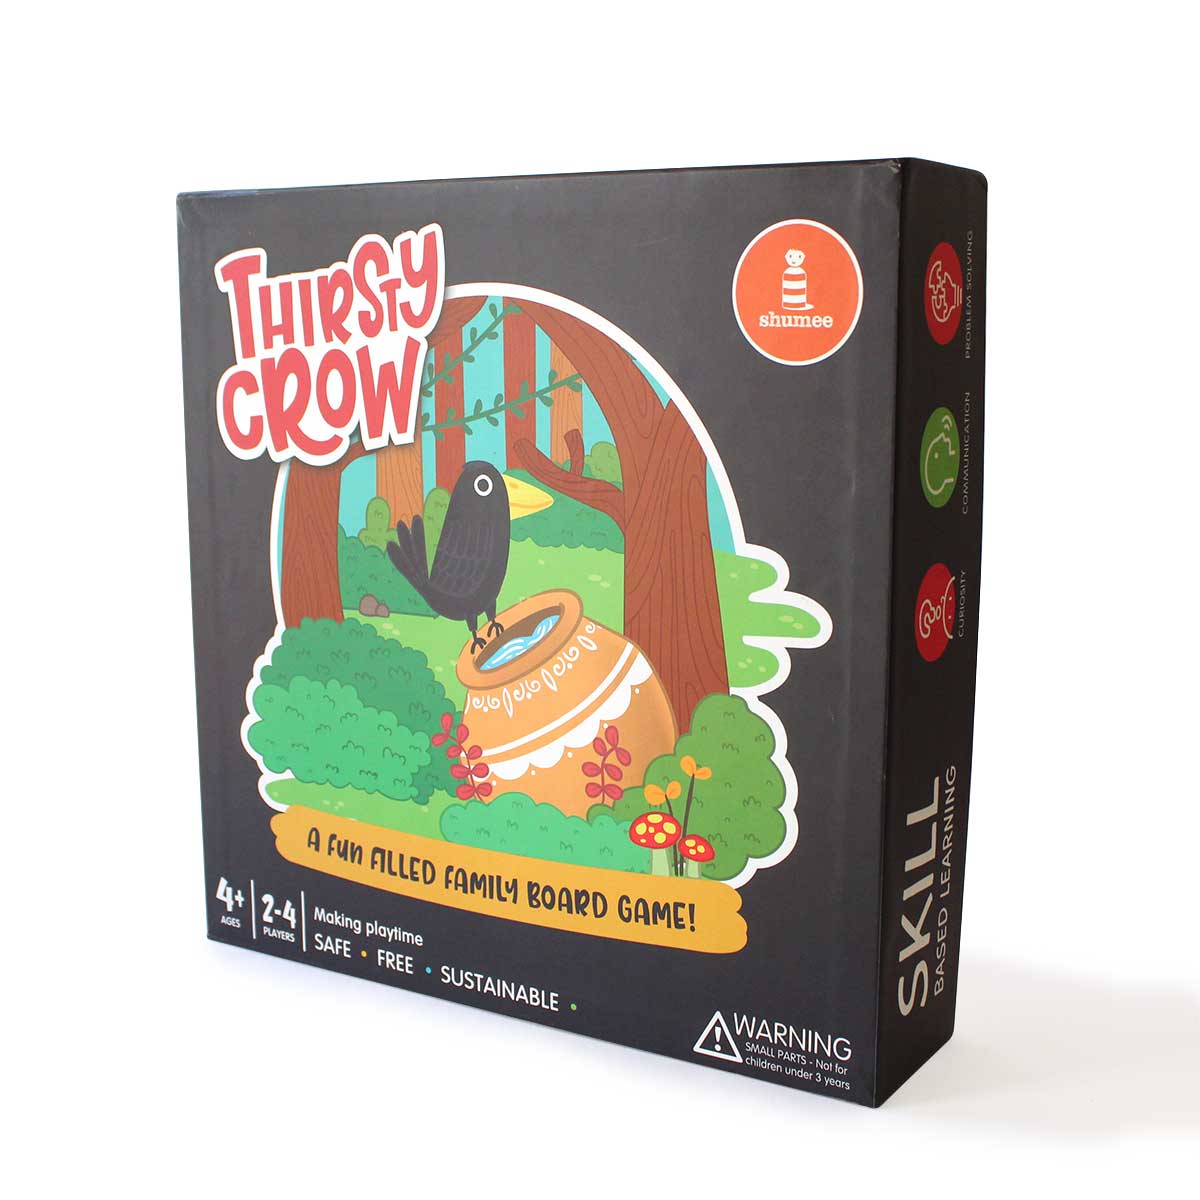 Shumee Thirsty Crow- Board Game - EXP-IN-TTC-W-4yrs-0097